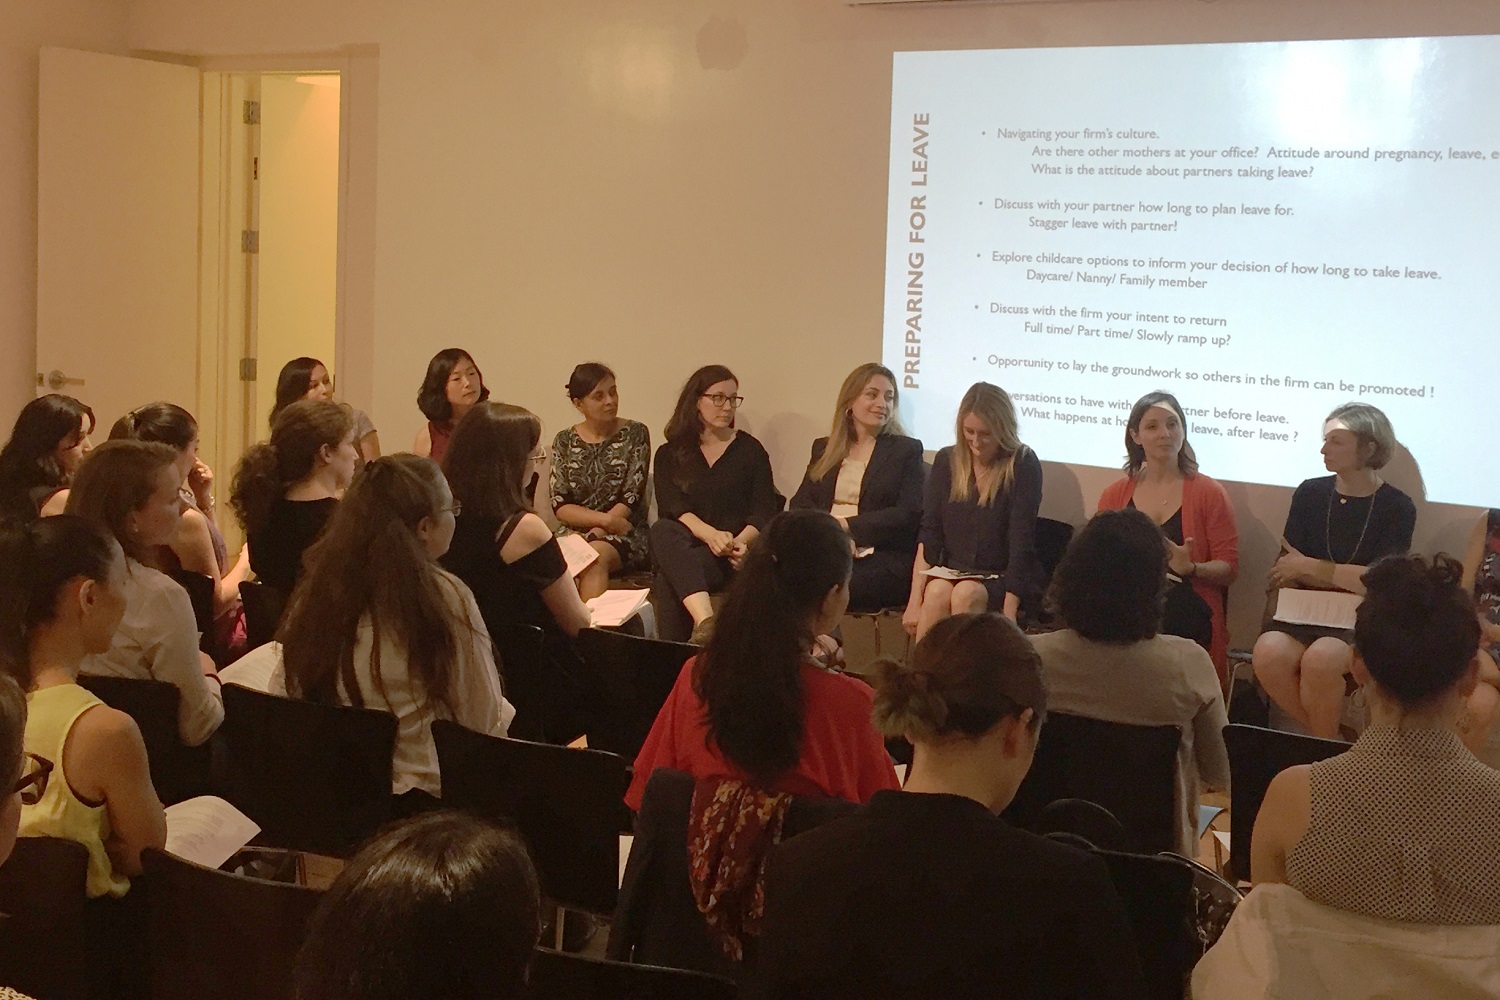 Image from June event at the Center for Architecture, "Rejoining the Workforce After Taking Parental Leave"